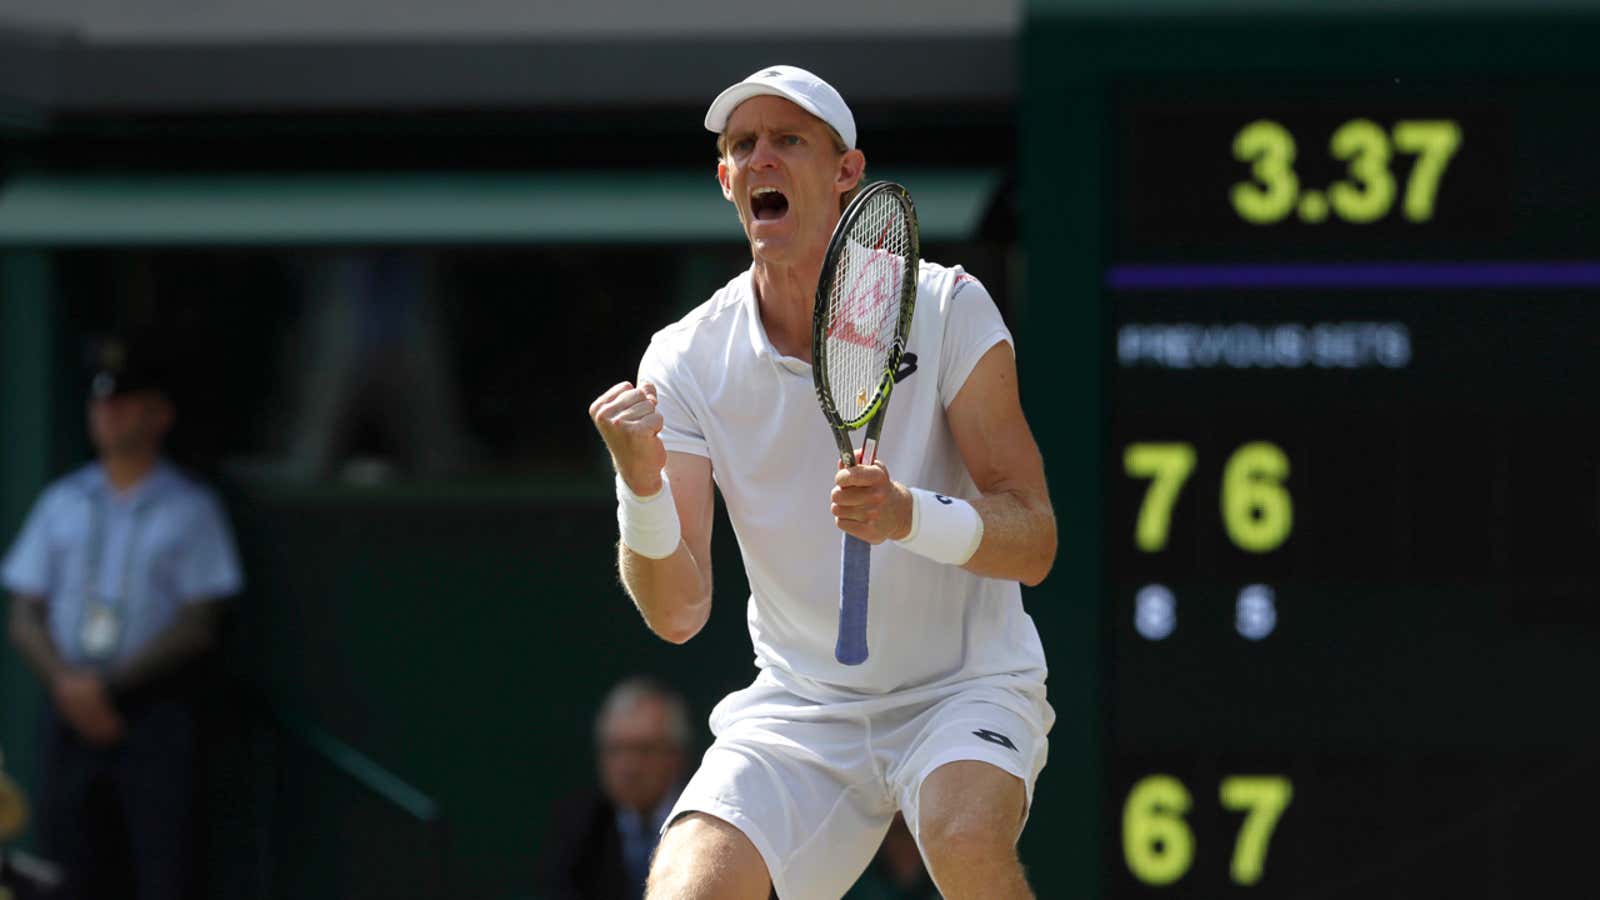 South Africa’s first Wimbledon hope in nearly a century.